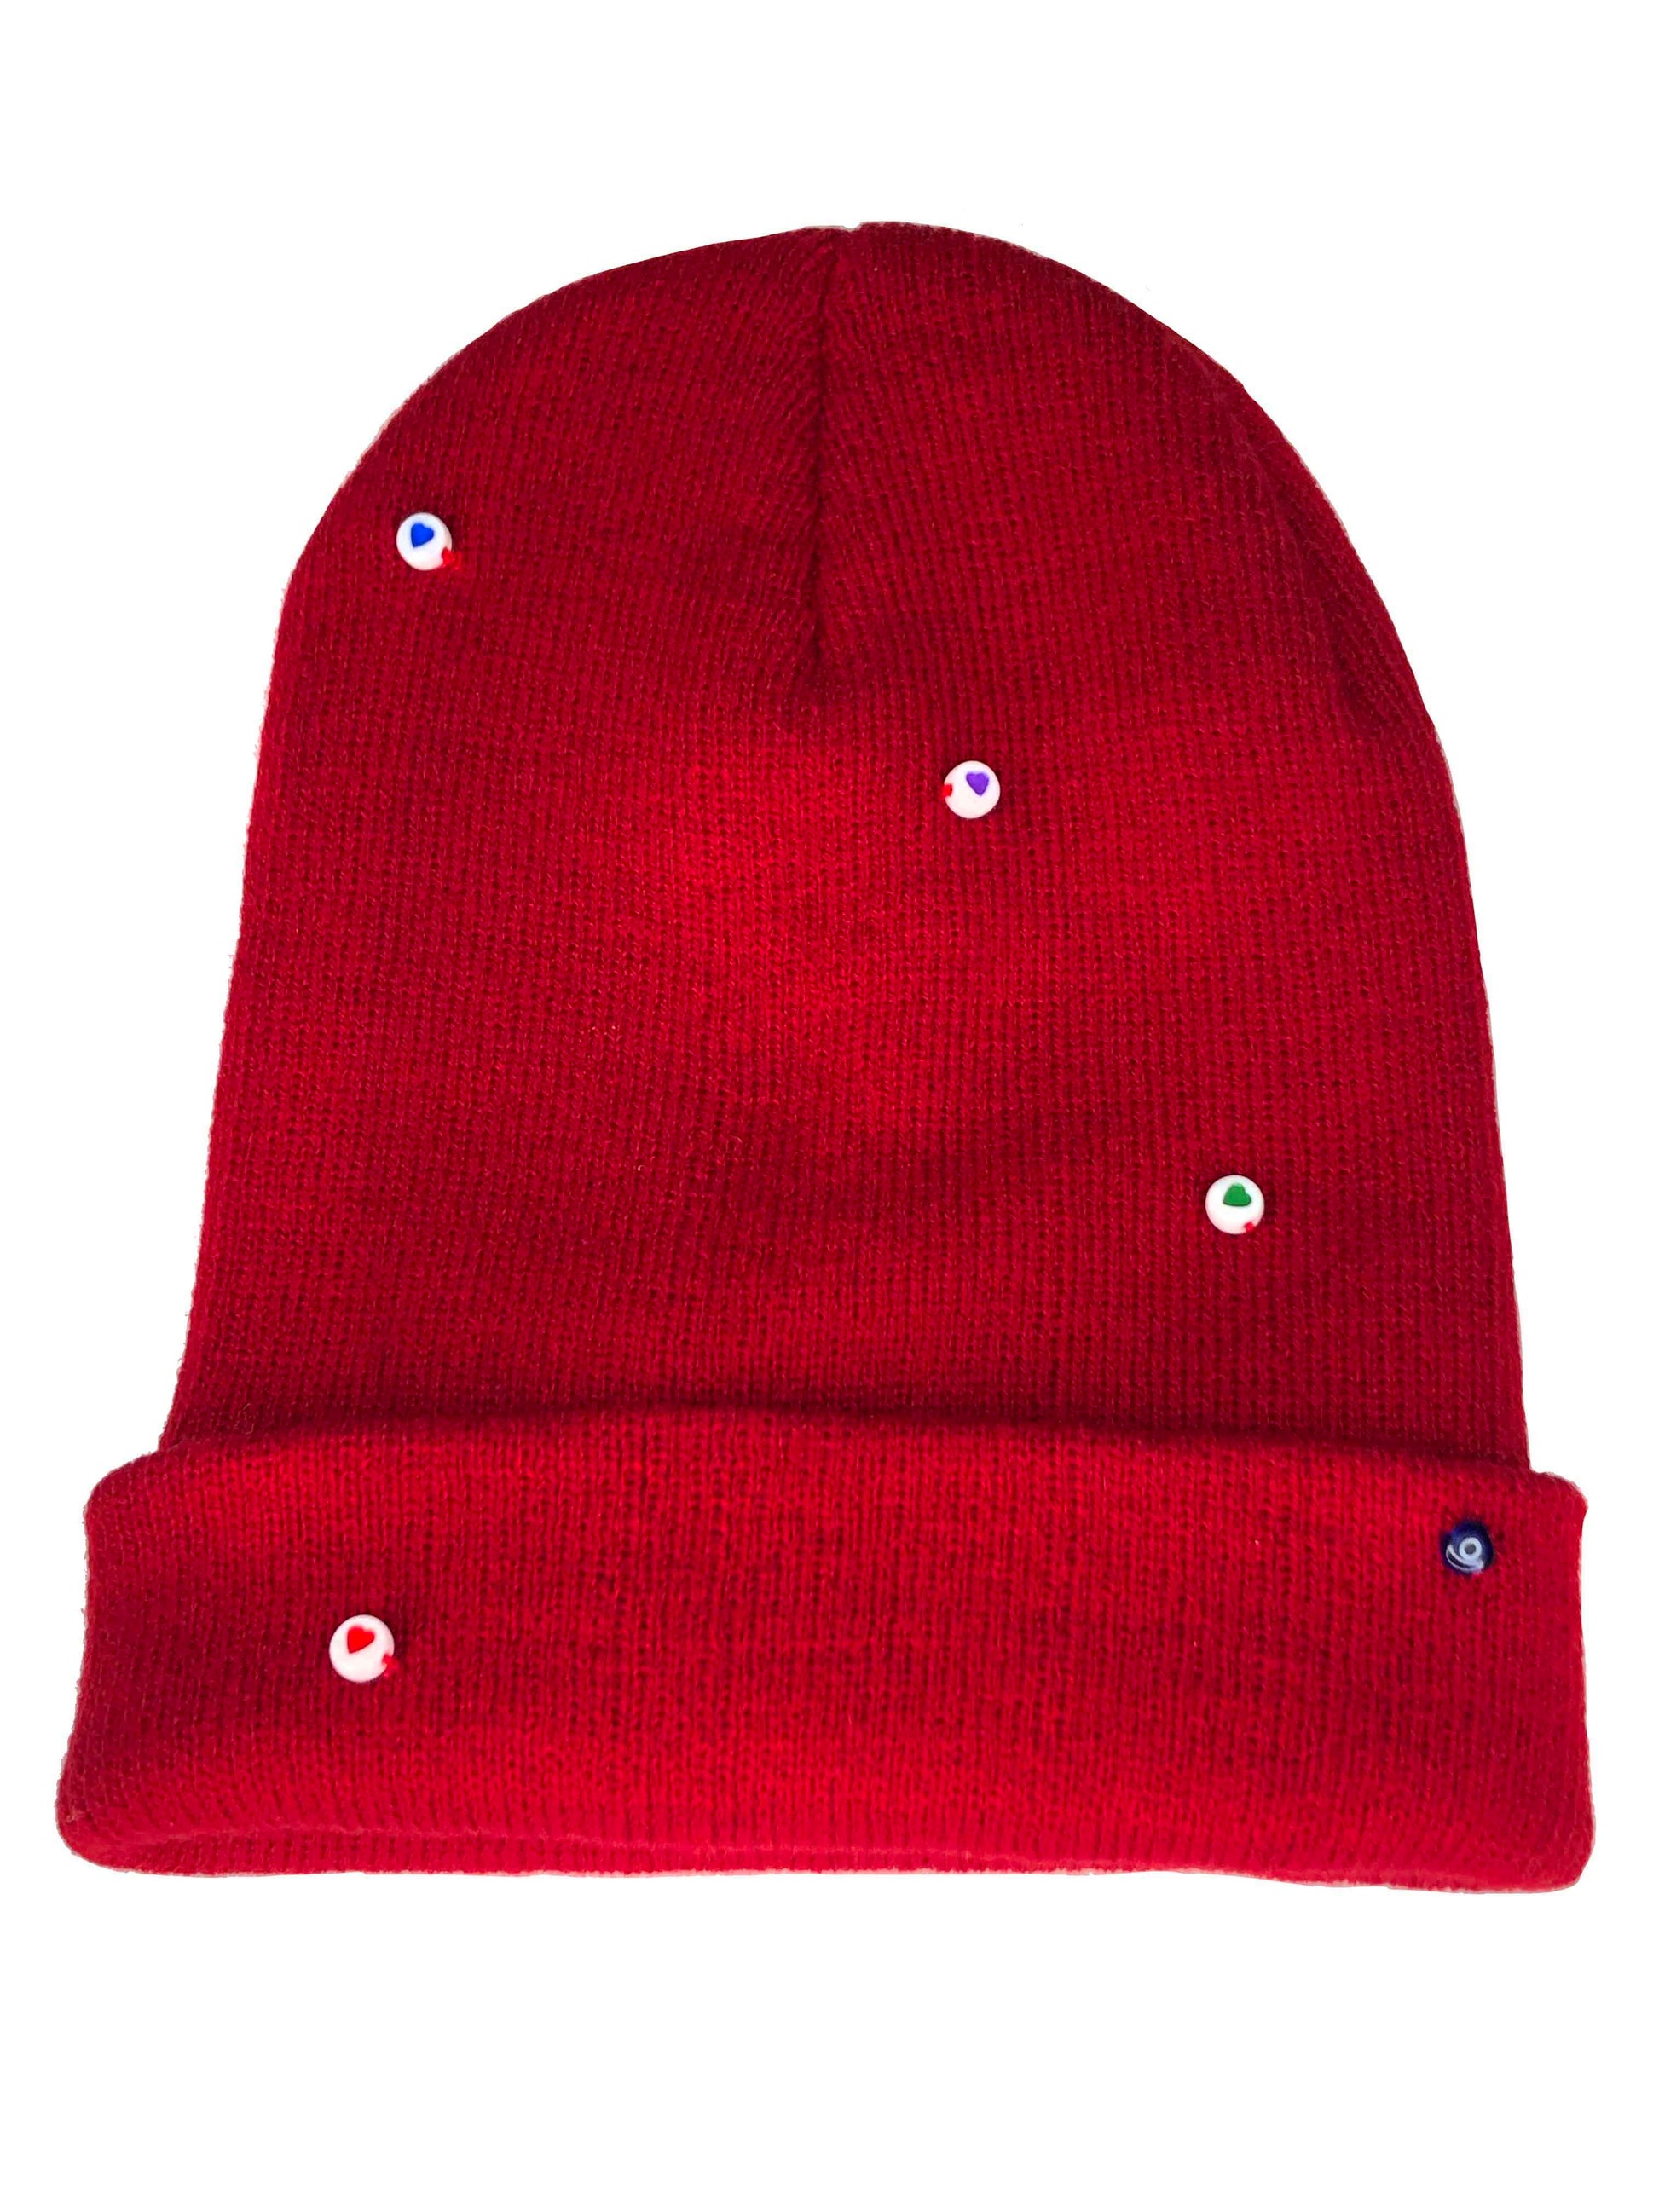 A red wool knit beanie decorated with both multicolor circle heart beads, and an evil eye charm.